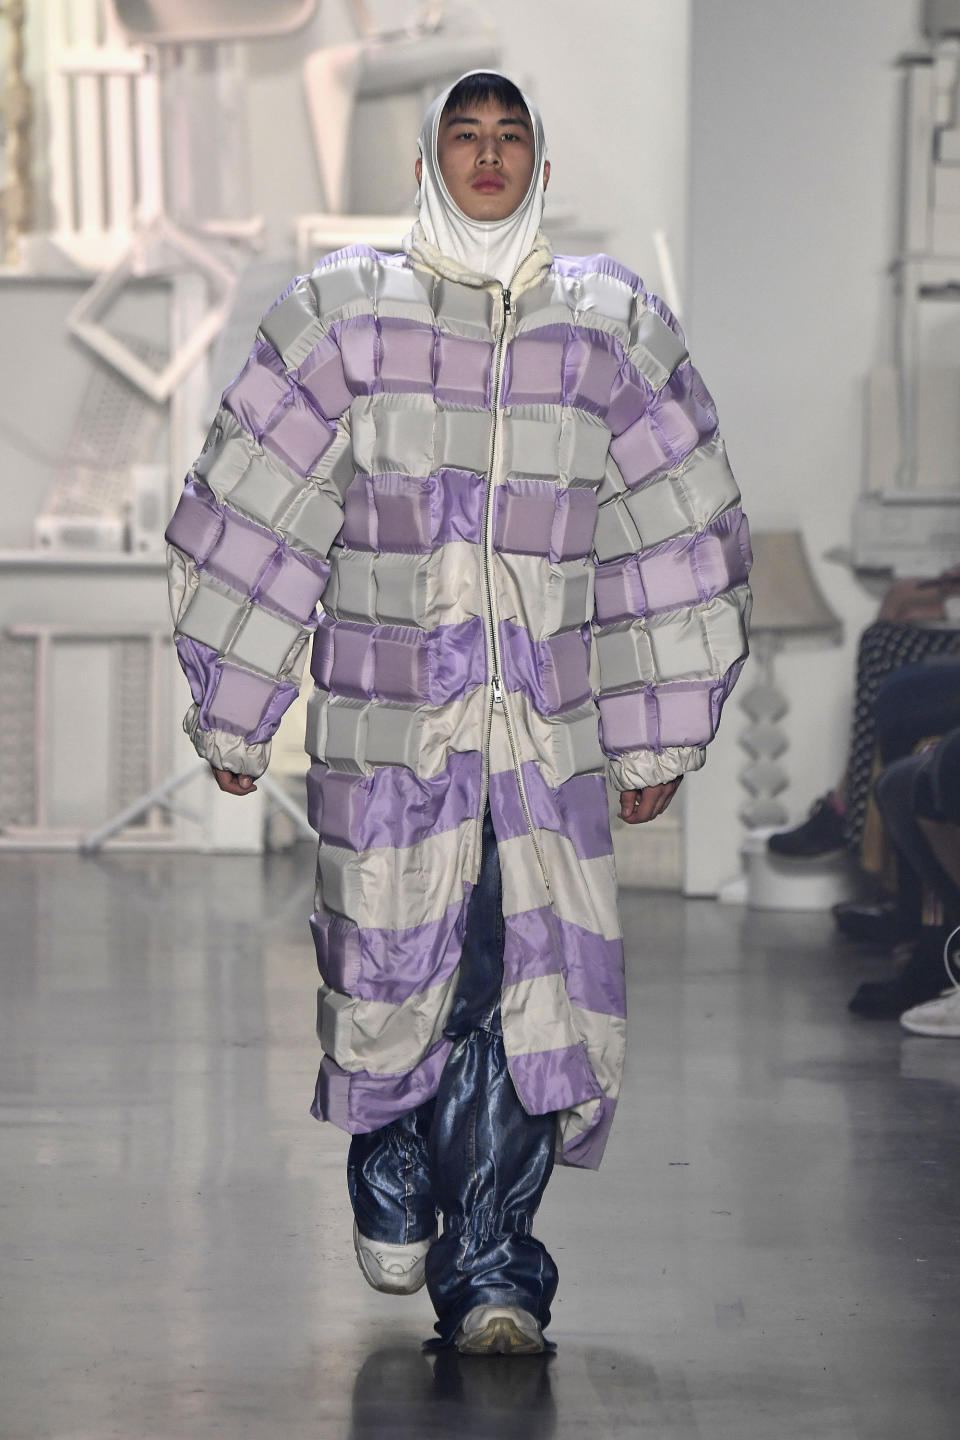 This coat by designer Yufei Liu (from the Rhode Island School of Design) definitely falls squarely into the <a href="https://www.huffingtonpost.com/entry/fall-2018-trend-oversized-coats_us_5b97e065e4b0162f47315a24" target="_blank" rel="noopener noreferrer">"oversized" trend</a> box and it's anything but basic.